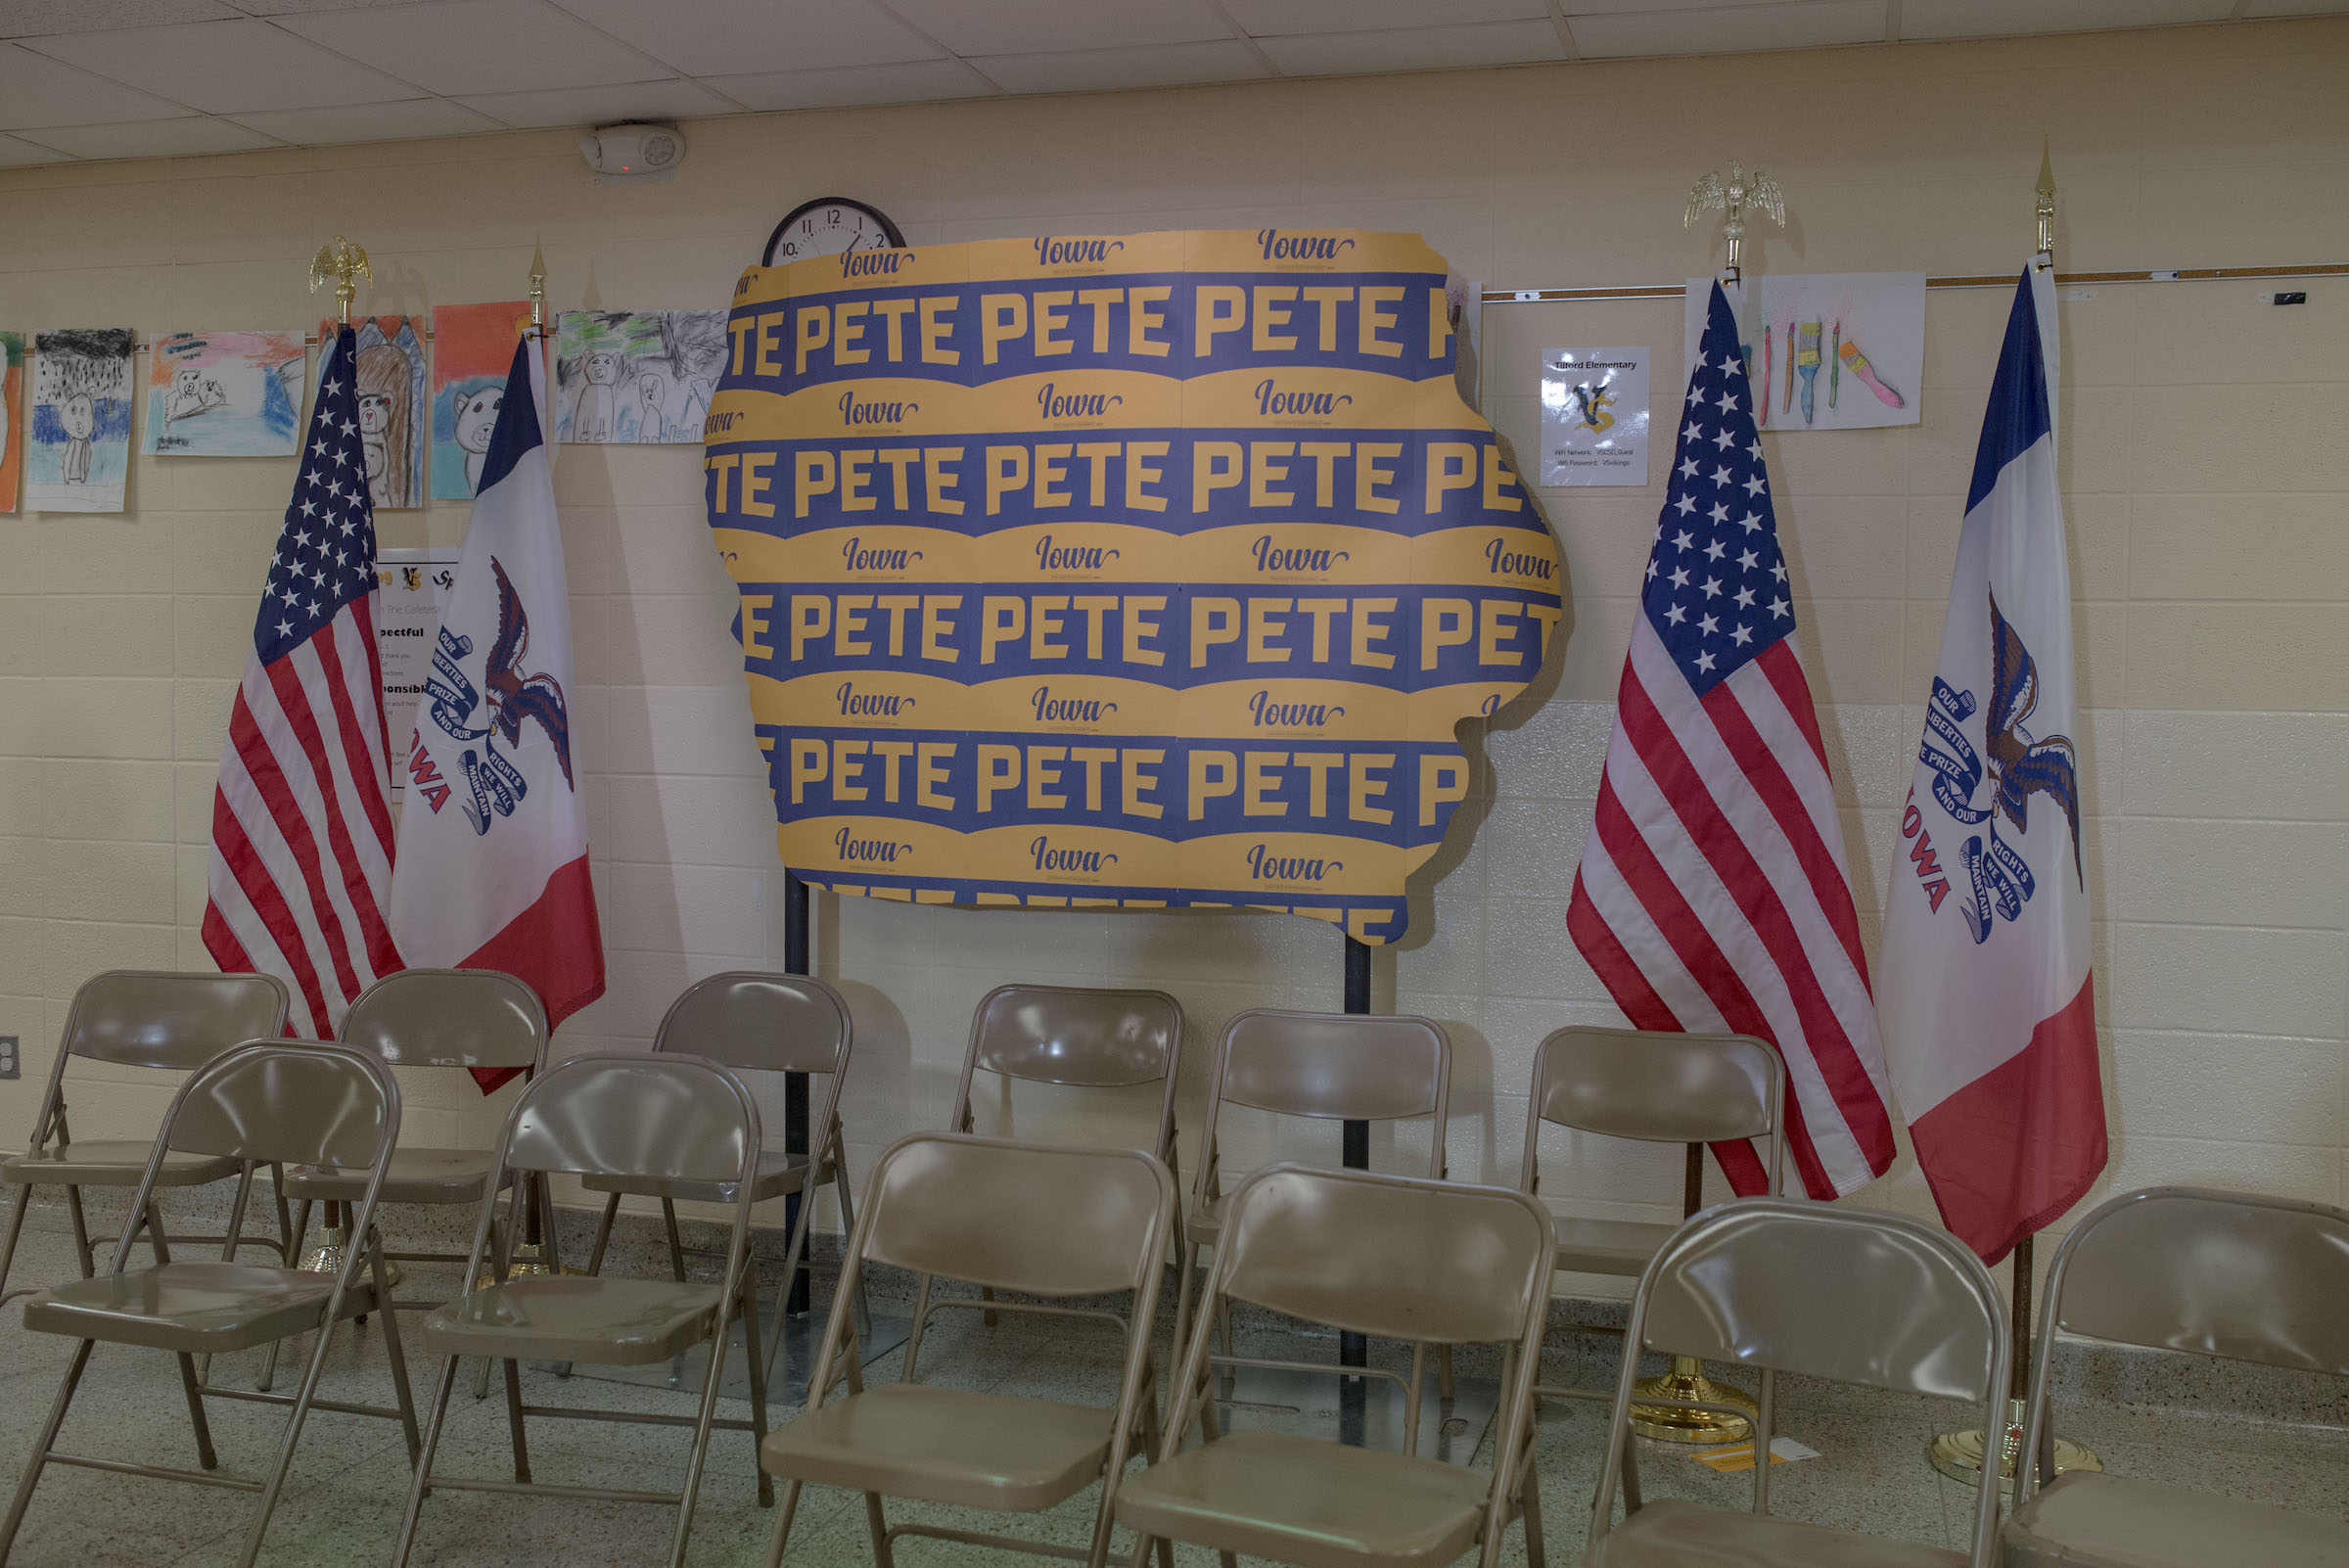 Pete Buttigieg Town Hall in Vinton, IA on Jan. 27, 2020. Photo by September Dawn Bottoms for TIME.